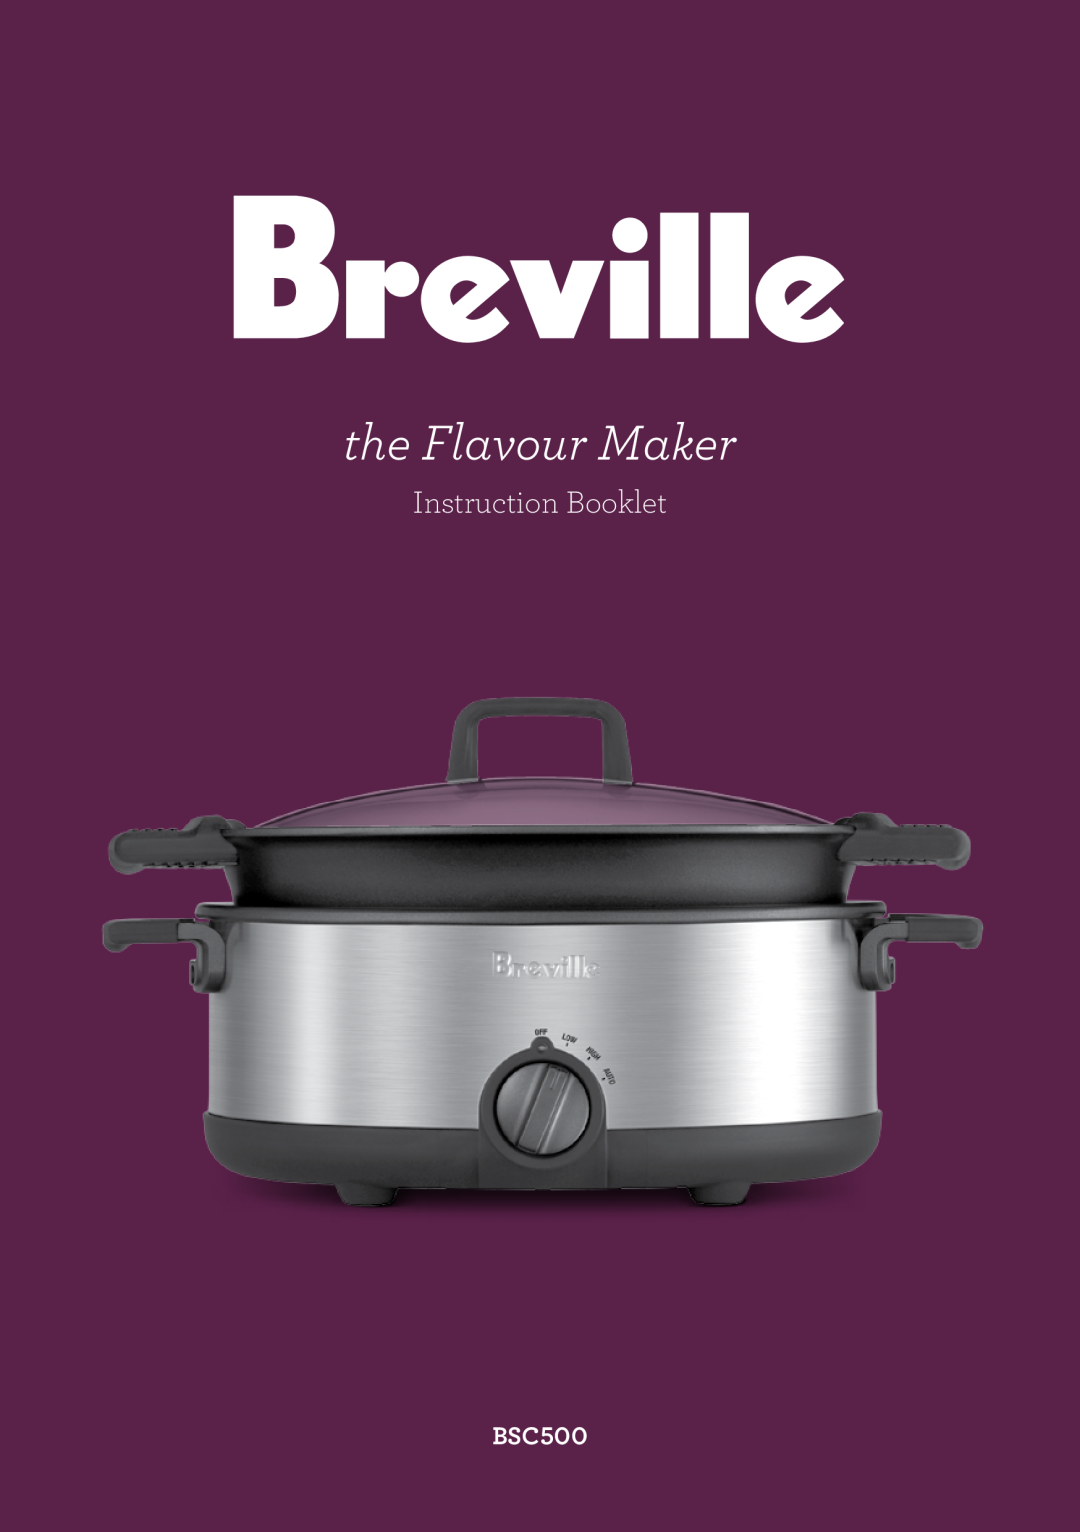 Breville BSC500 manual the Flavour Maker, Instruction Booklet 